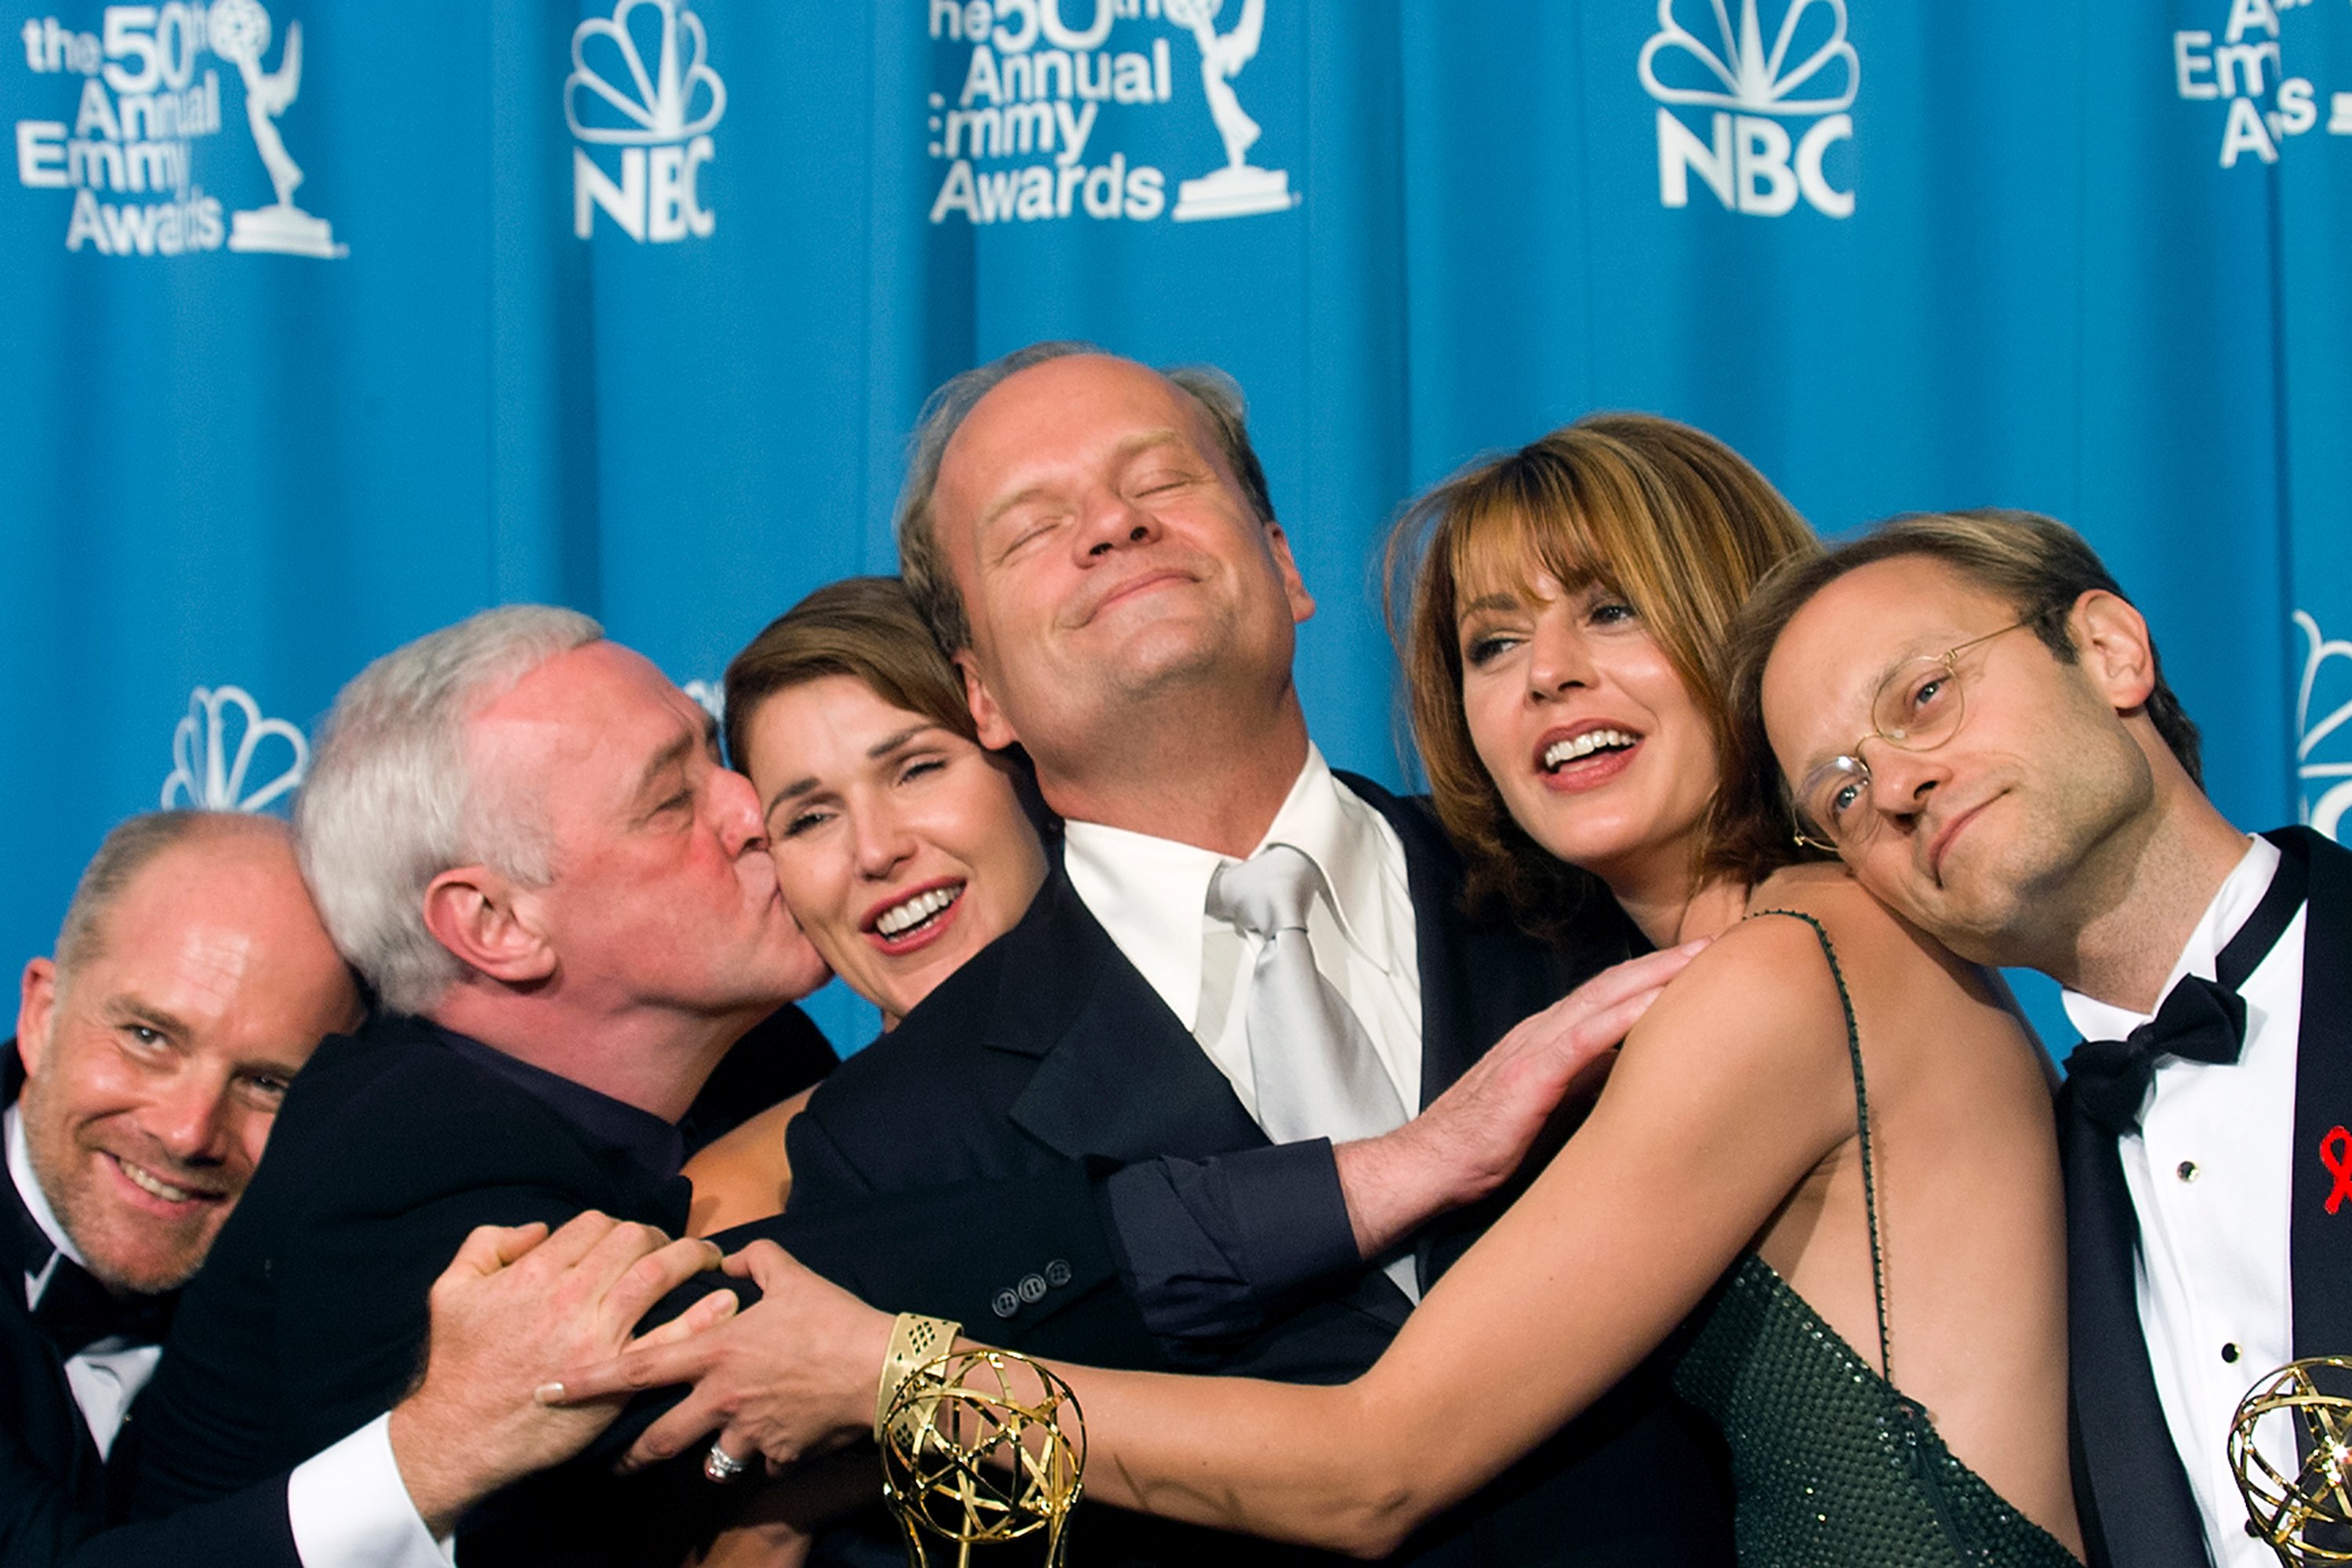 Kelsey Grammer (center) and David Hyde Pierce (R) are joined by fellow 'Frasier' cast members actors Jane Leeves, Peri Gilpin, John Mahoney and James Burrows attend the Emmy Awards in 1998